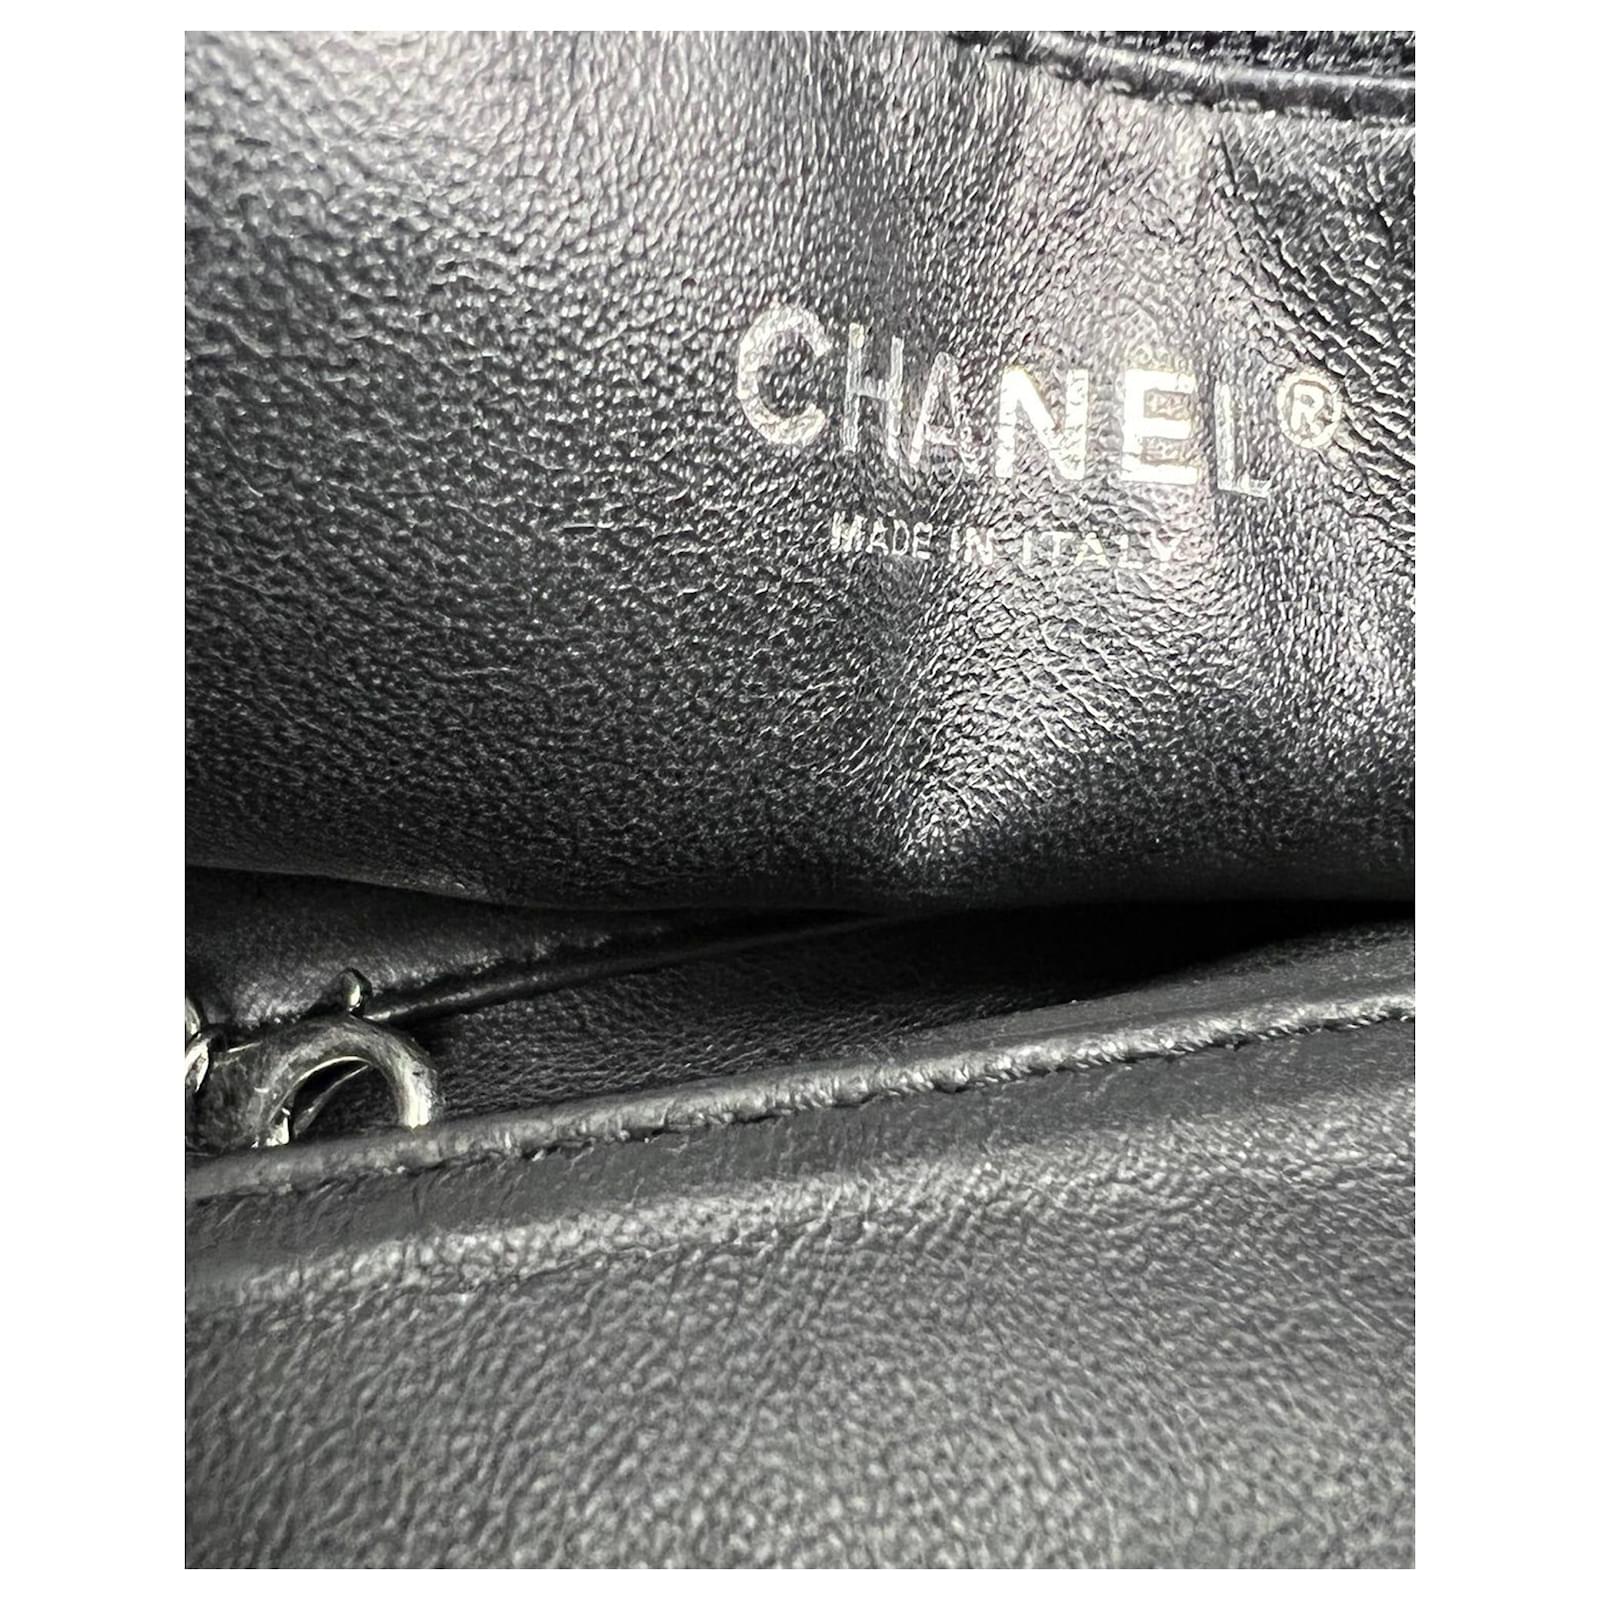 Chanel Tote Calfskin Large East West Modern Chain Dark Gray Tote